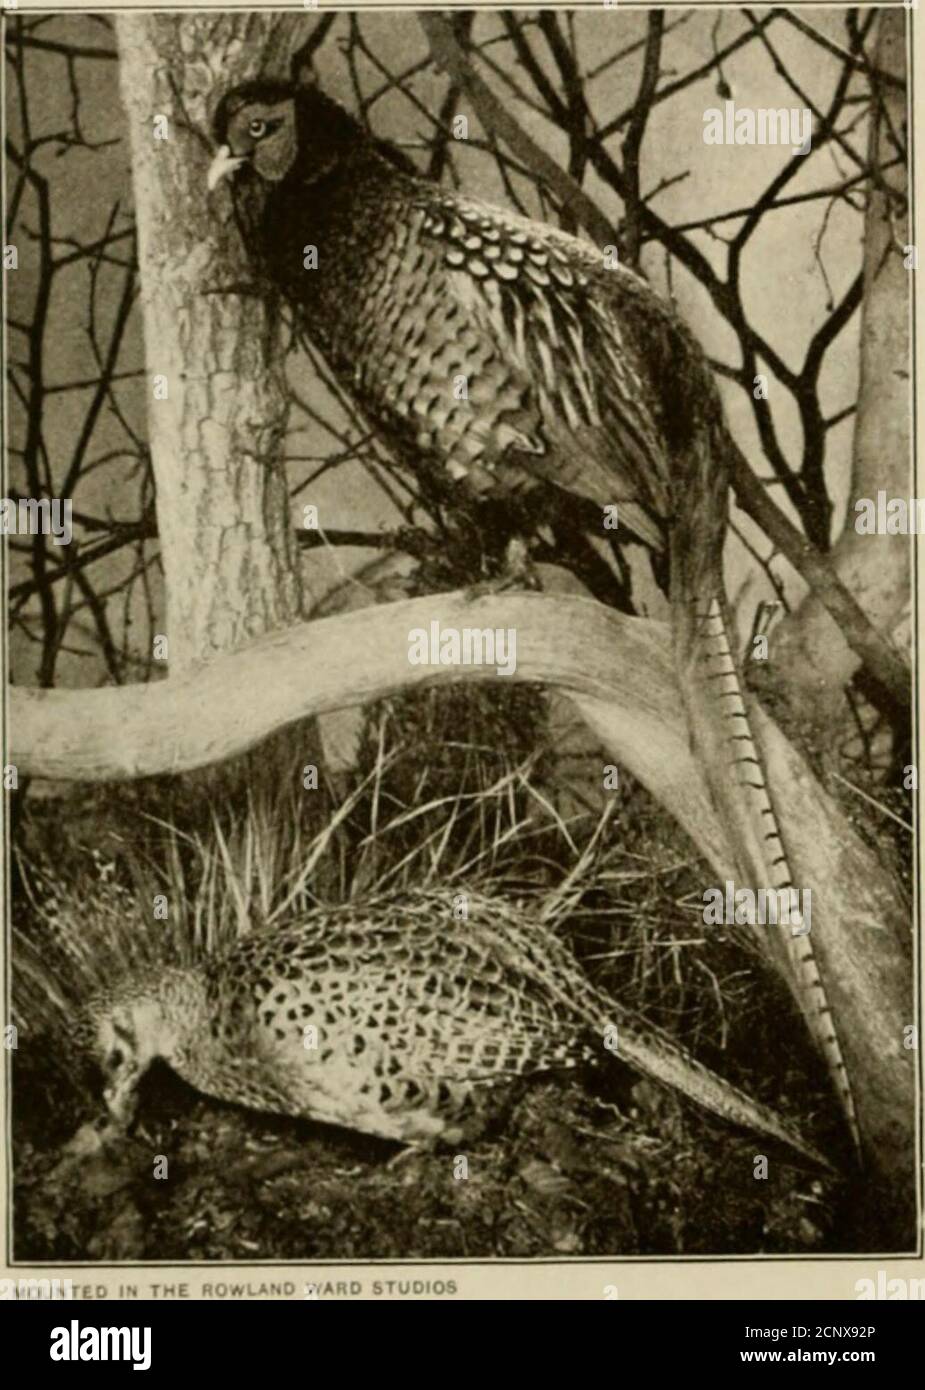 . The sportsman's British bird book . -pe, in which the white ring is absent, while the rump-feathers are a bluish slate-colour ; the interscapulars are dark greenshot with purple, and ornamented with crescentic lines of buff and the. IllKAS.XNT. PARTRIDGE 13 under-parts uniformly dark green : thirdly, the P. torquatus type, with awhite ring round the neck, the rump-feathers slate-colour, with a rust-coloured patch on each side, the interscapulars and flanks orange-buffcolour, and the bars on the tail broad. Hens of the P. colchicus andP. torquatus types closely resemble one another, the inter Stock Photo